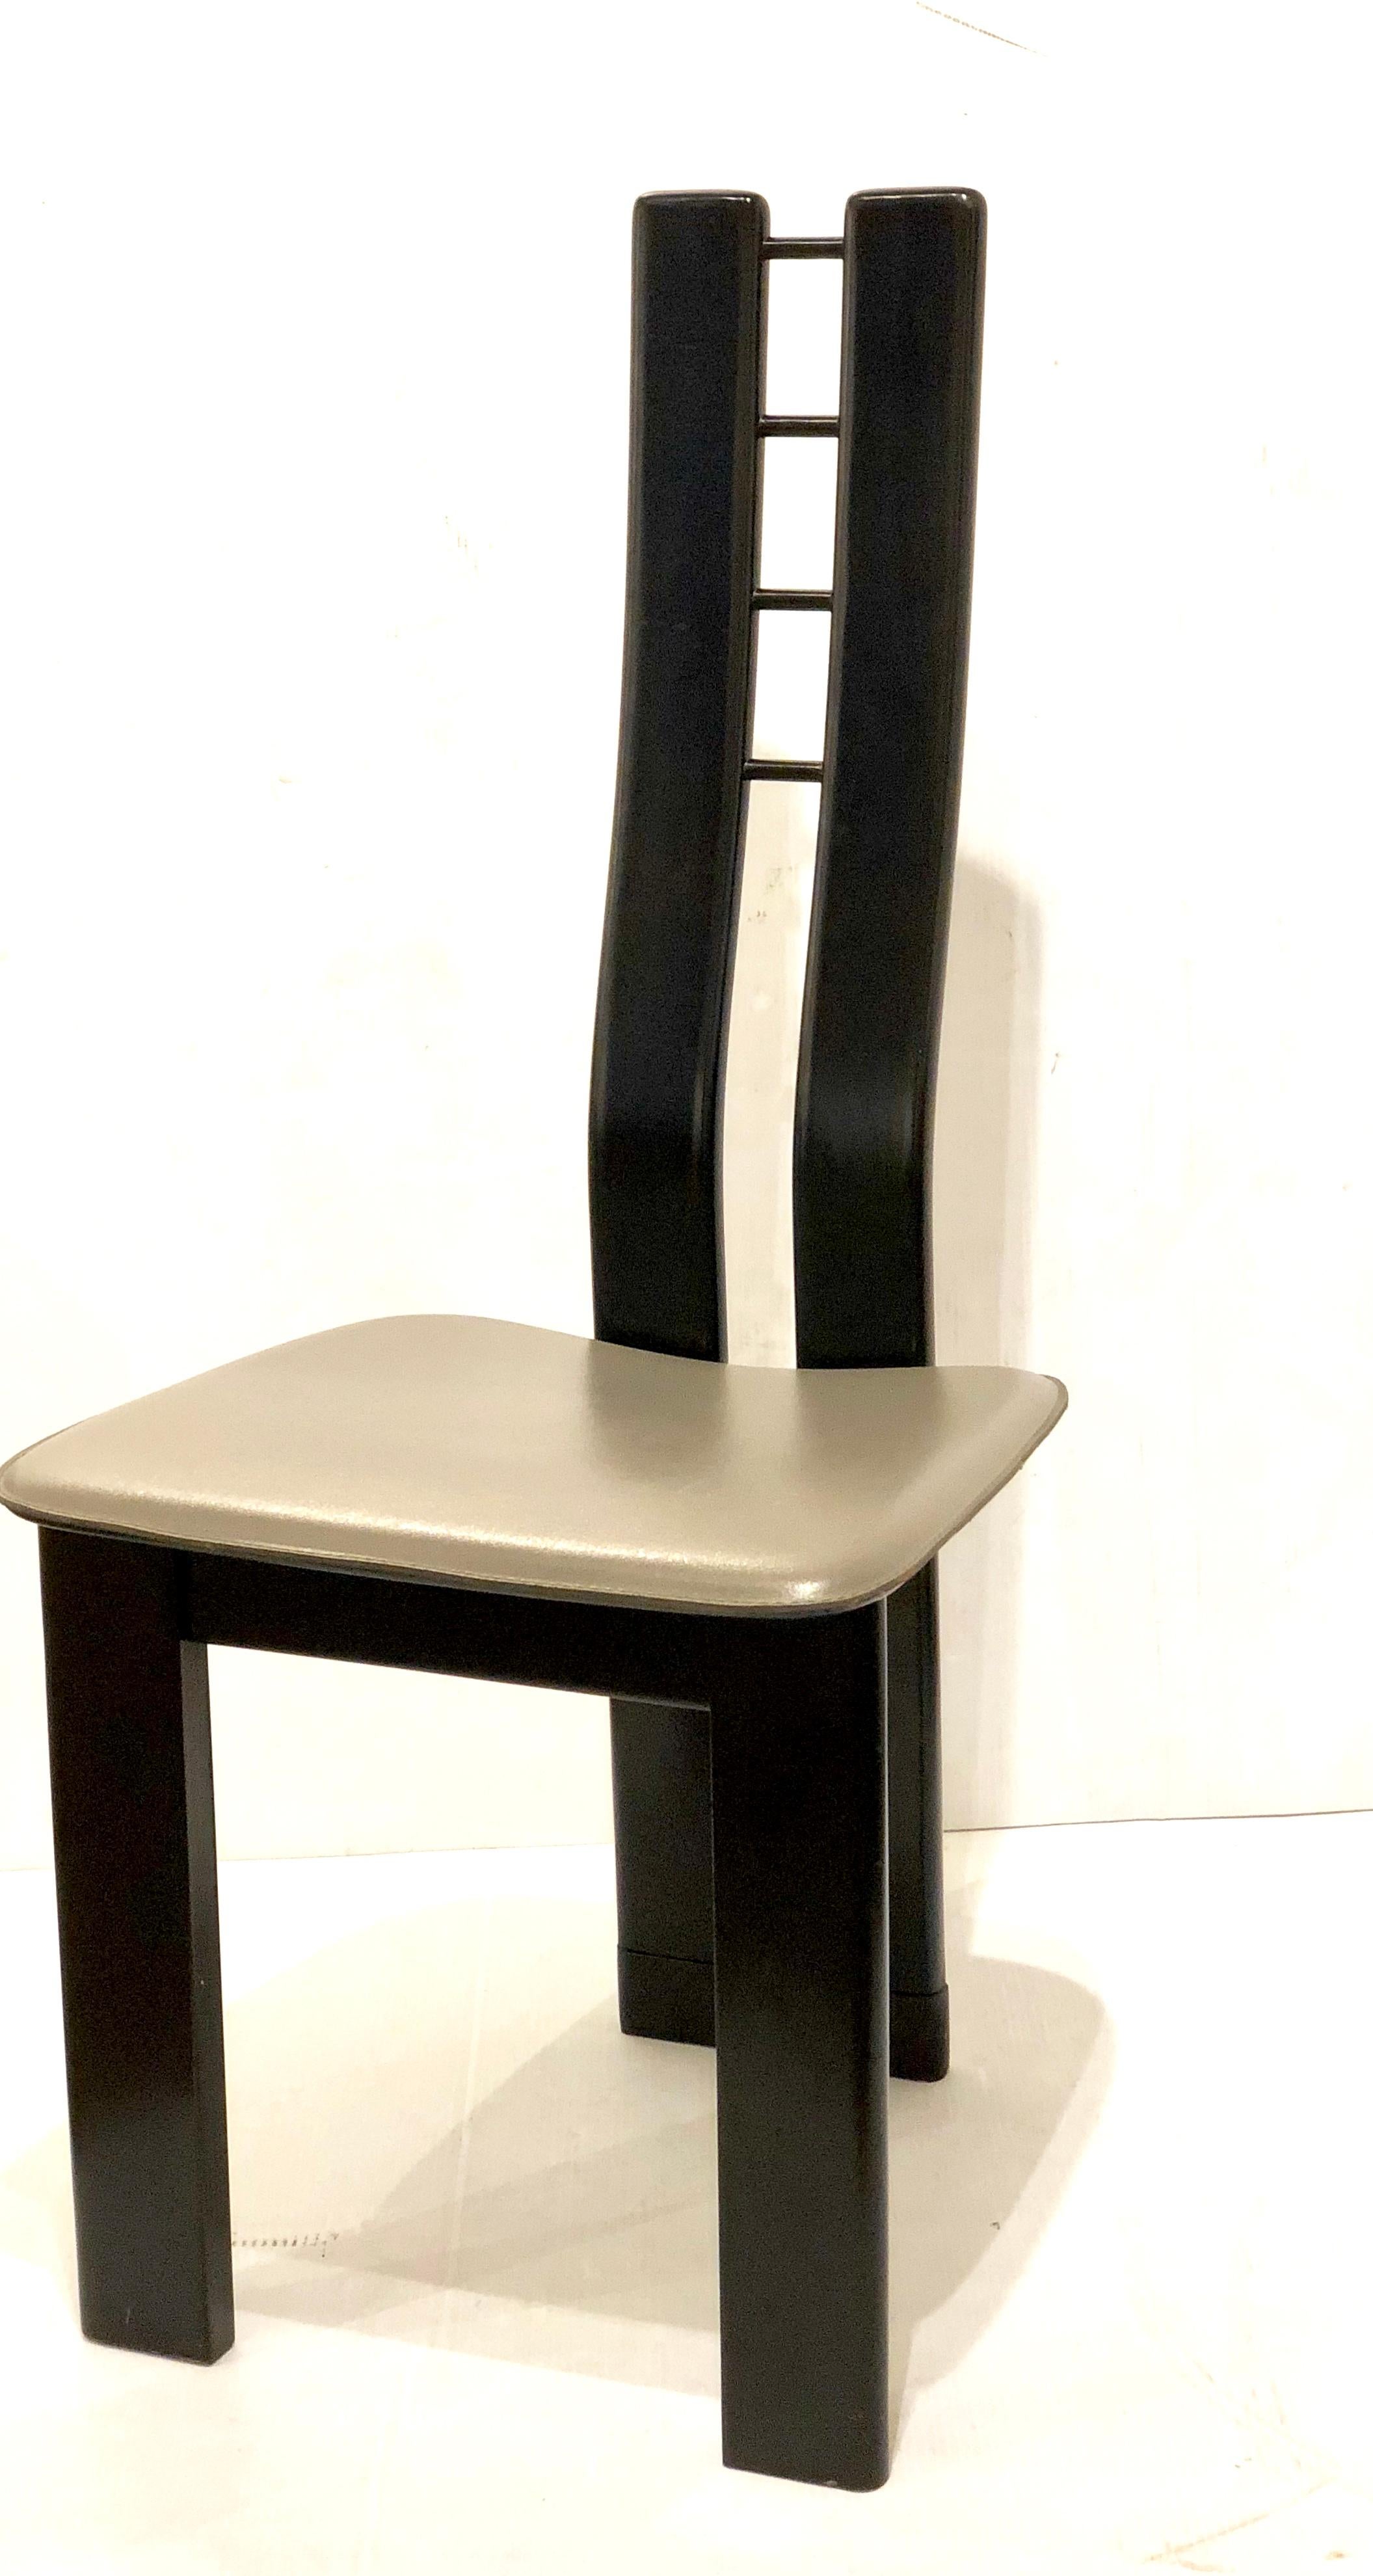 20th Century Post Modern Italian Chair Leather Seat and Ebonized Satin Finish on Wood Frame For Sale